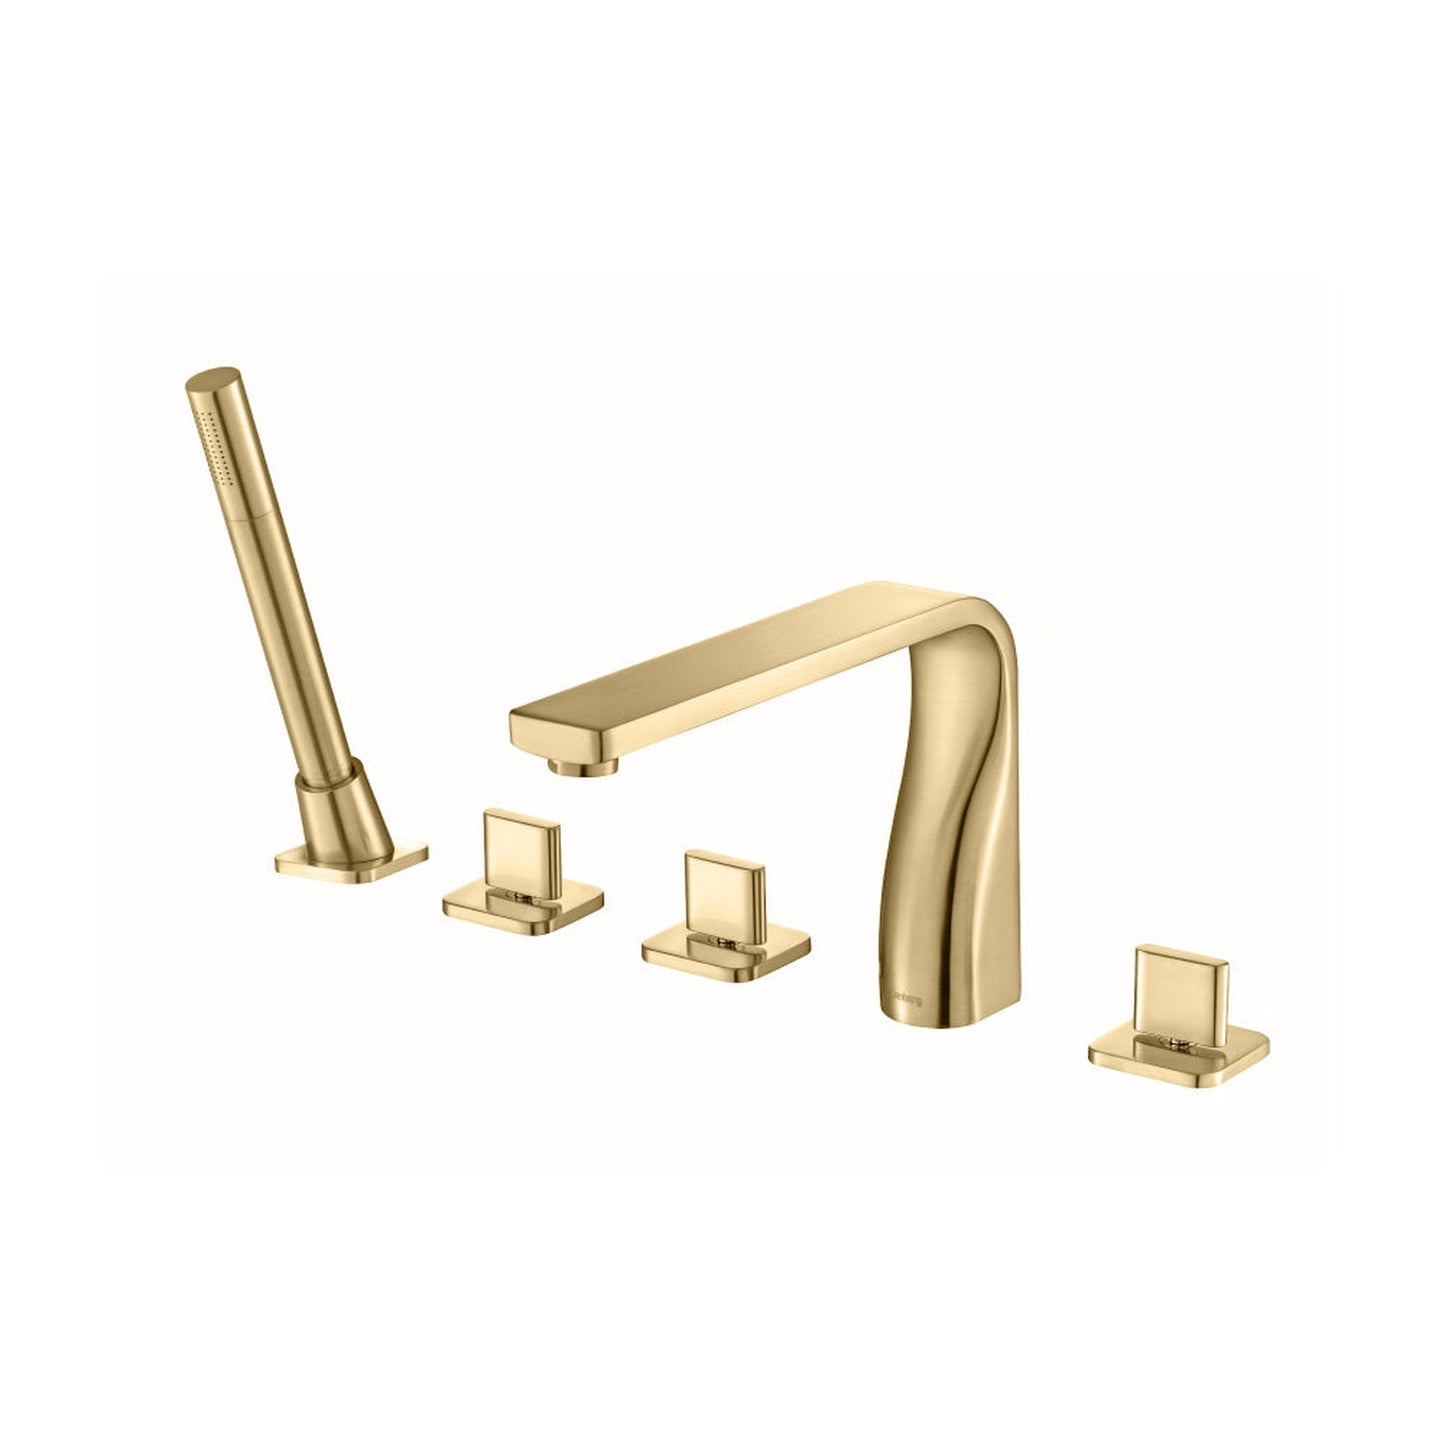 Isenberg Serie 260 Five Hole Deck Mounted Roman Tub Faucet With Hand Shower in Satin Brass